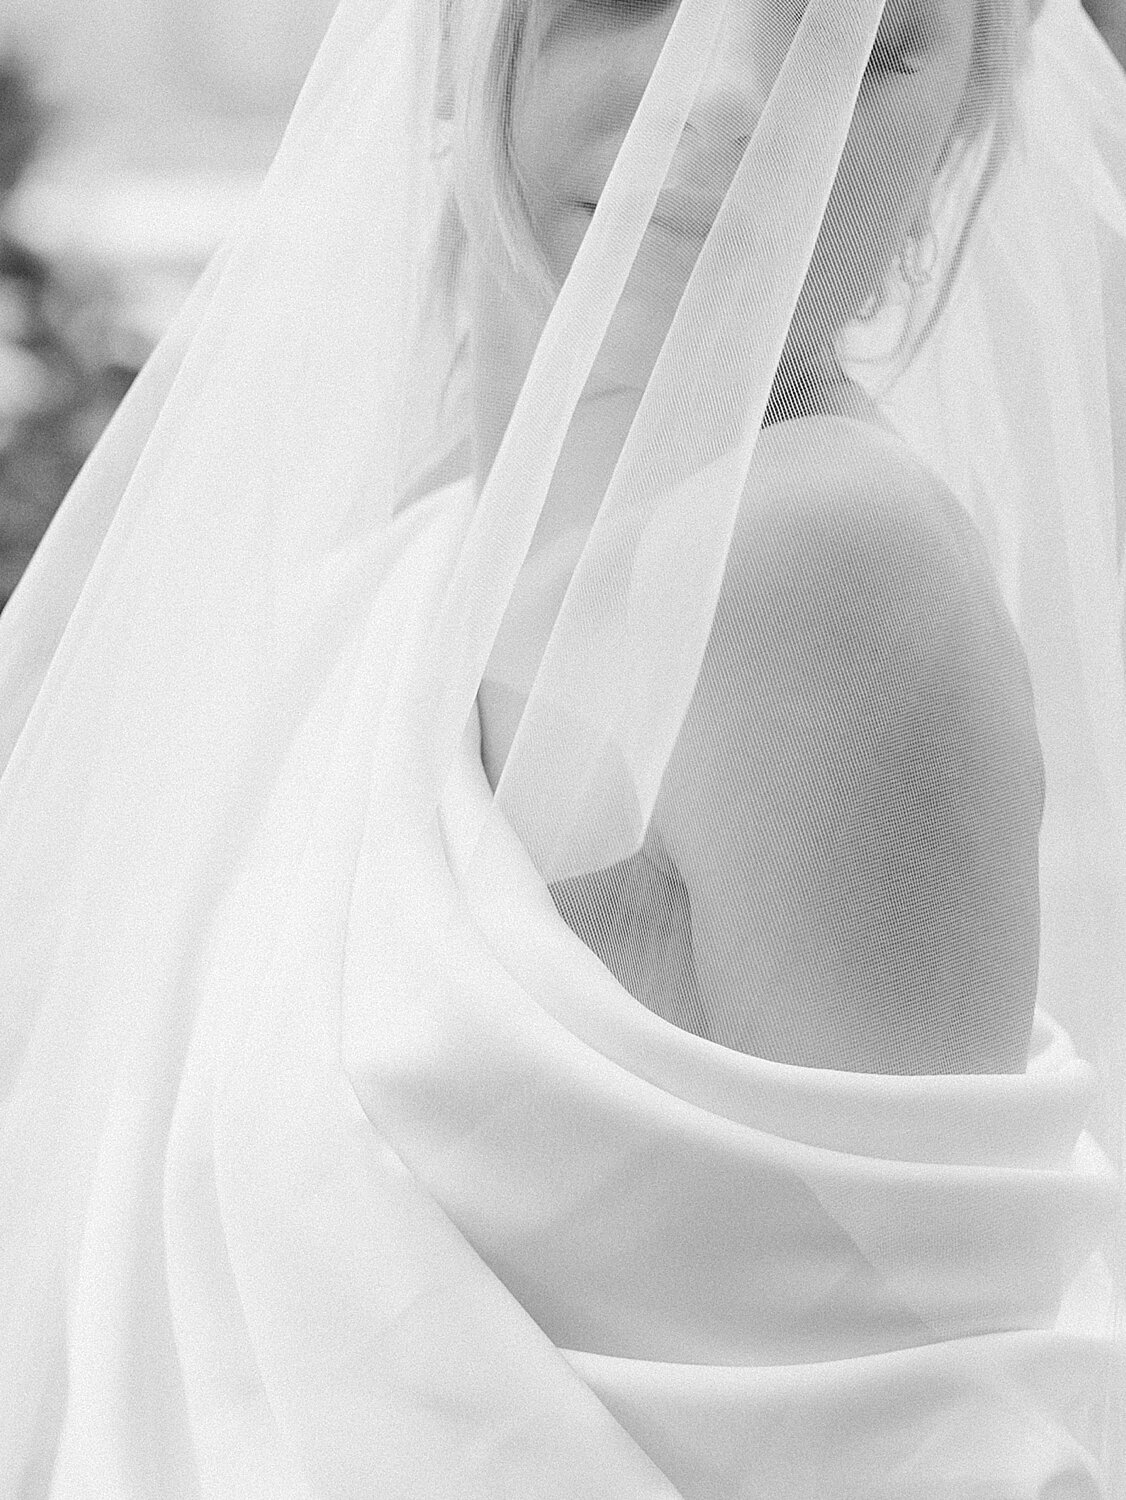 bride poses with veil around shoulders | Asher Gardner Photography | Intimate Ceremony in DUMBO New York